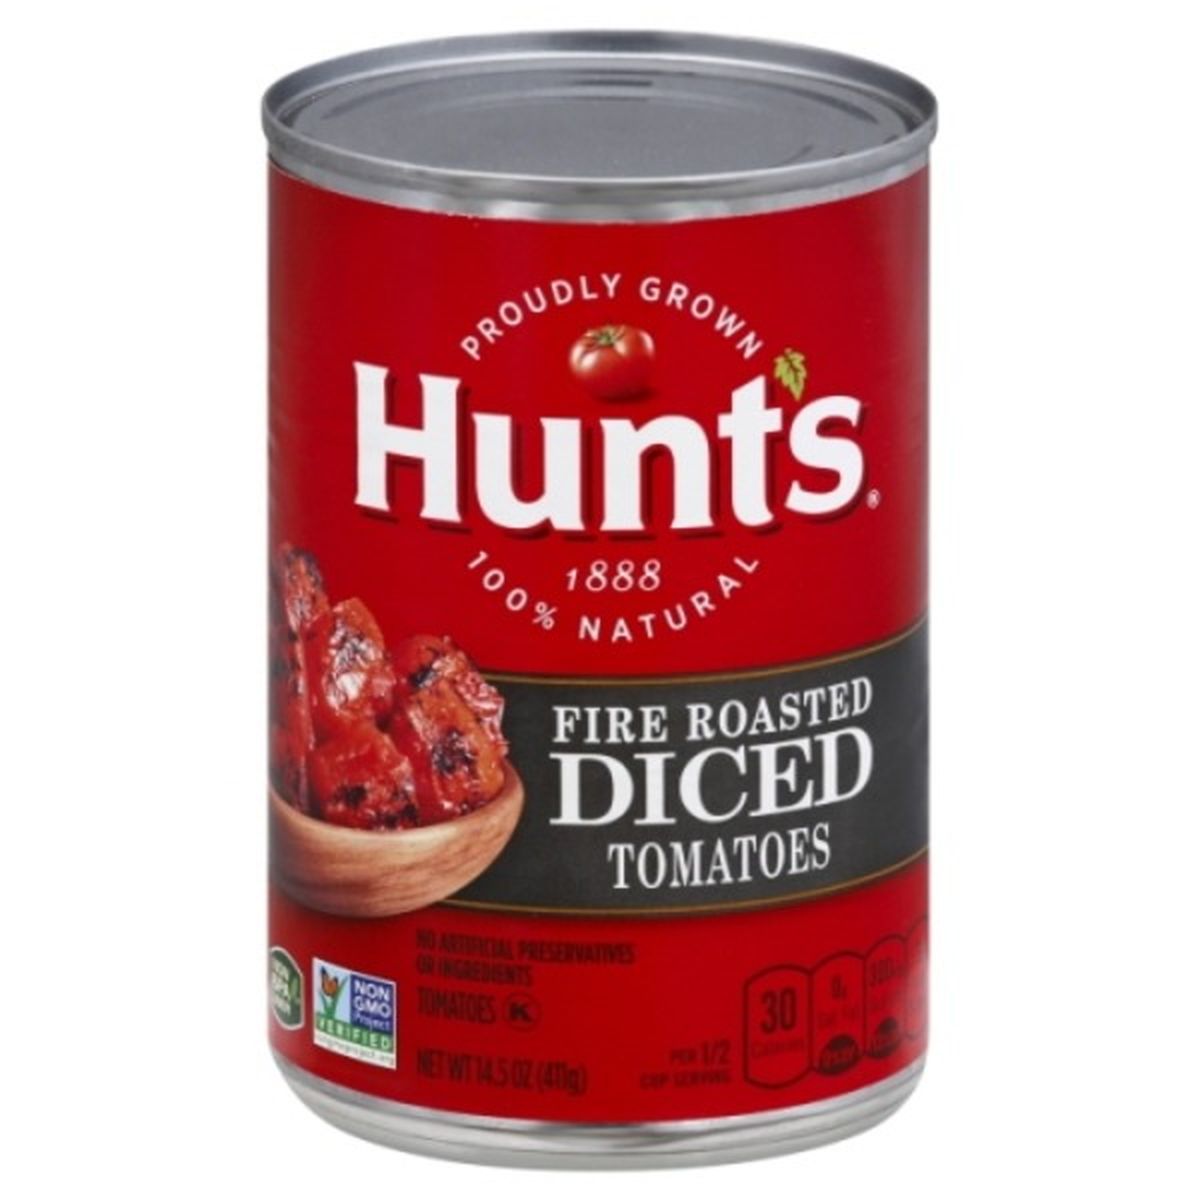 Calories in Hunt's Tomatoes, Diced, Fire Roasted